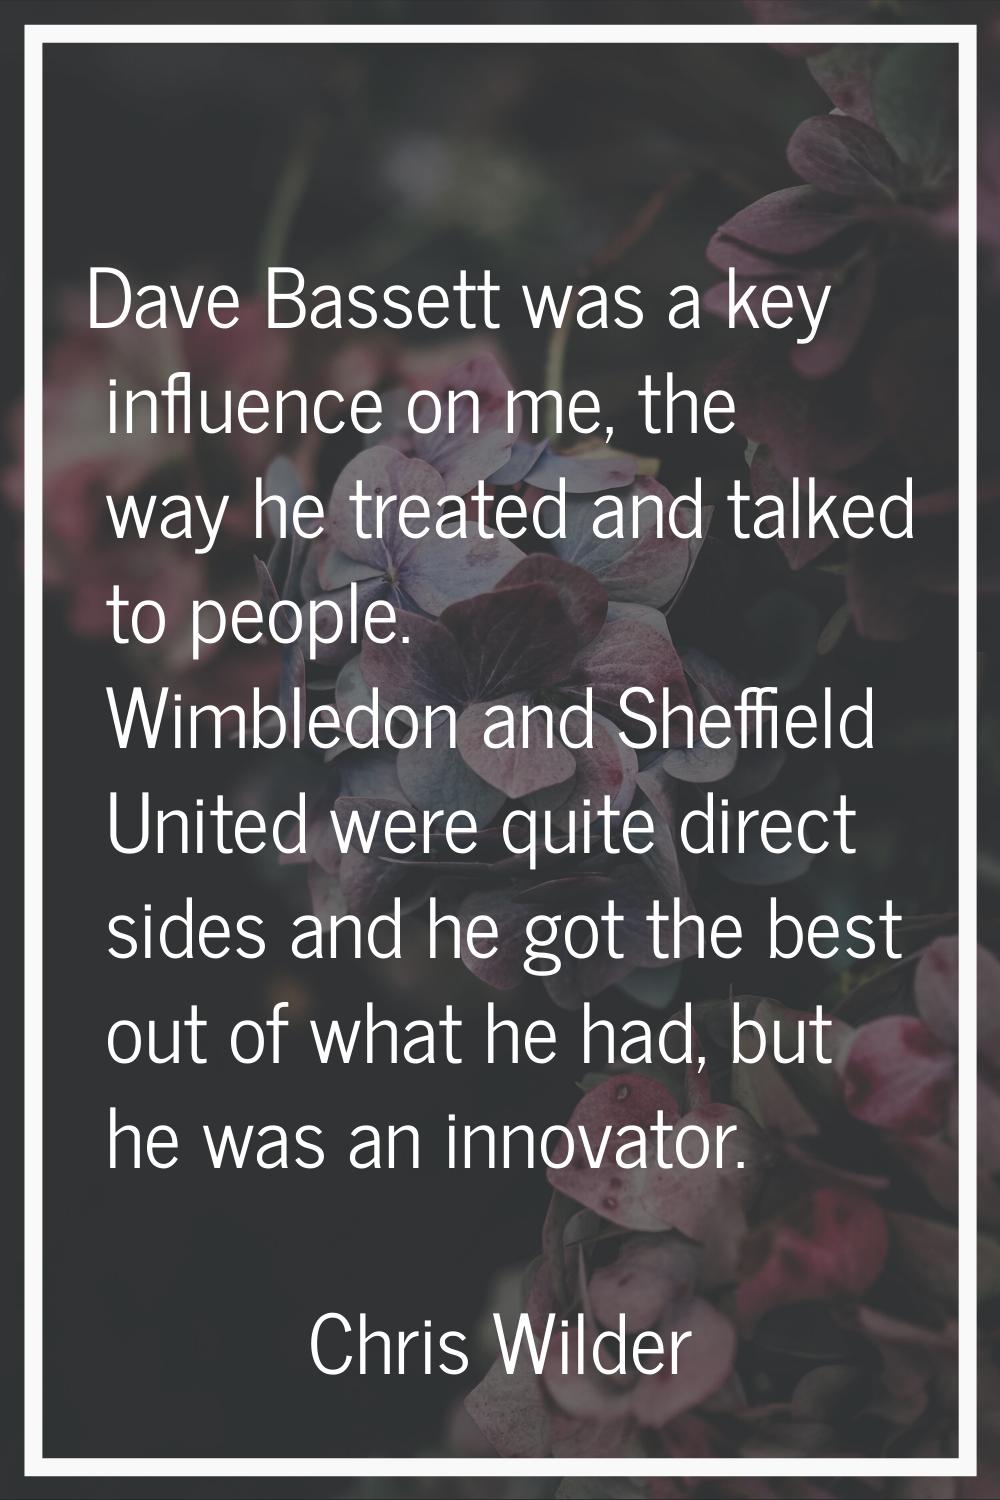 Dave Bassett was a key influence on me, the way he treated and talked to people. Wimbledon and Shef